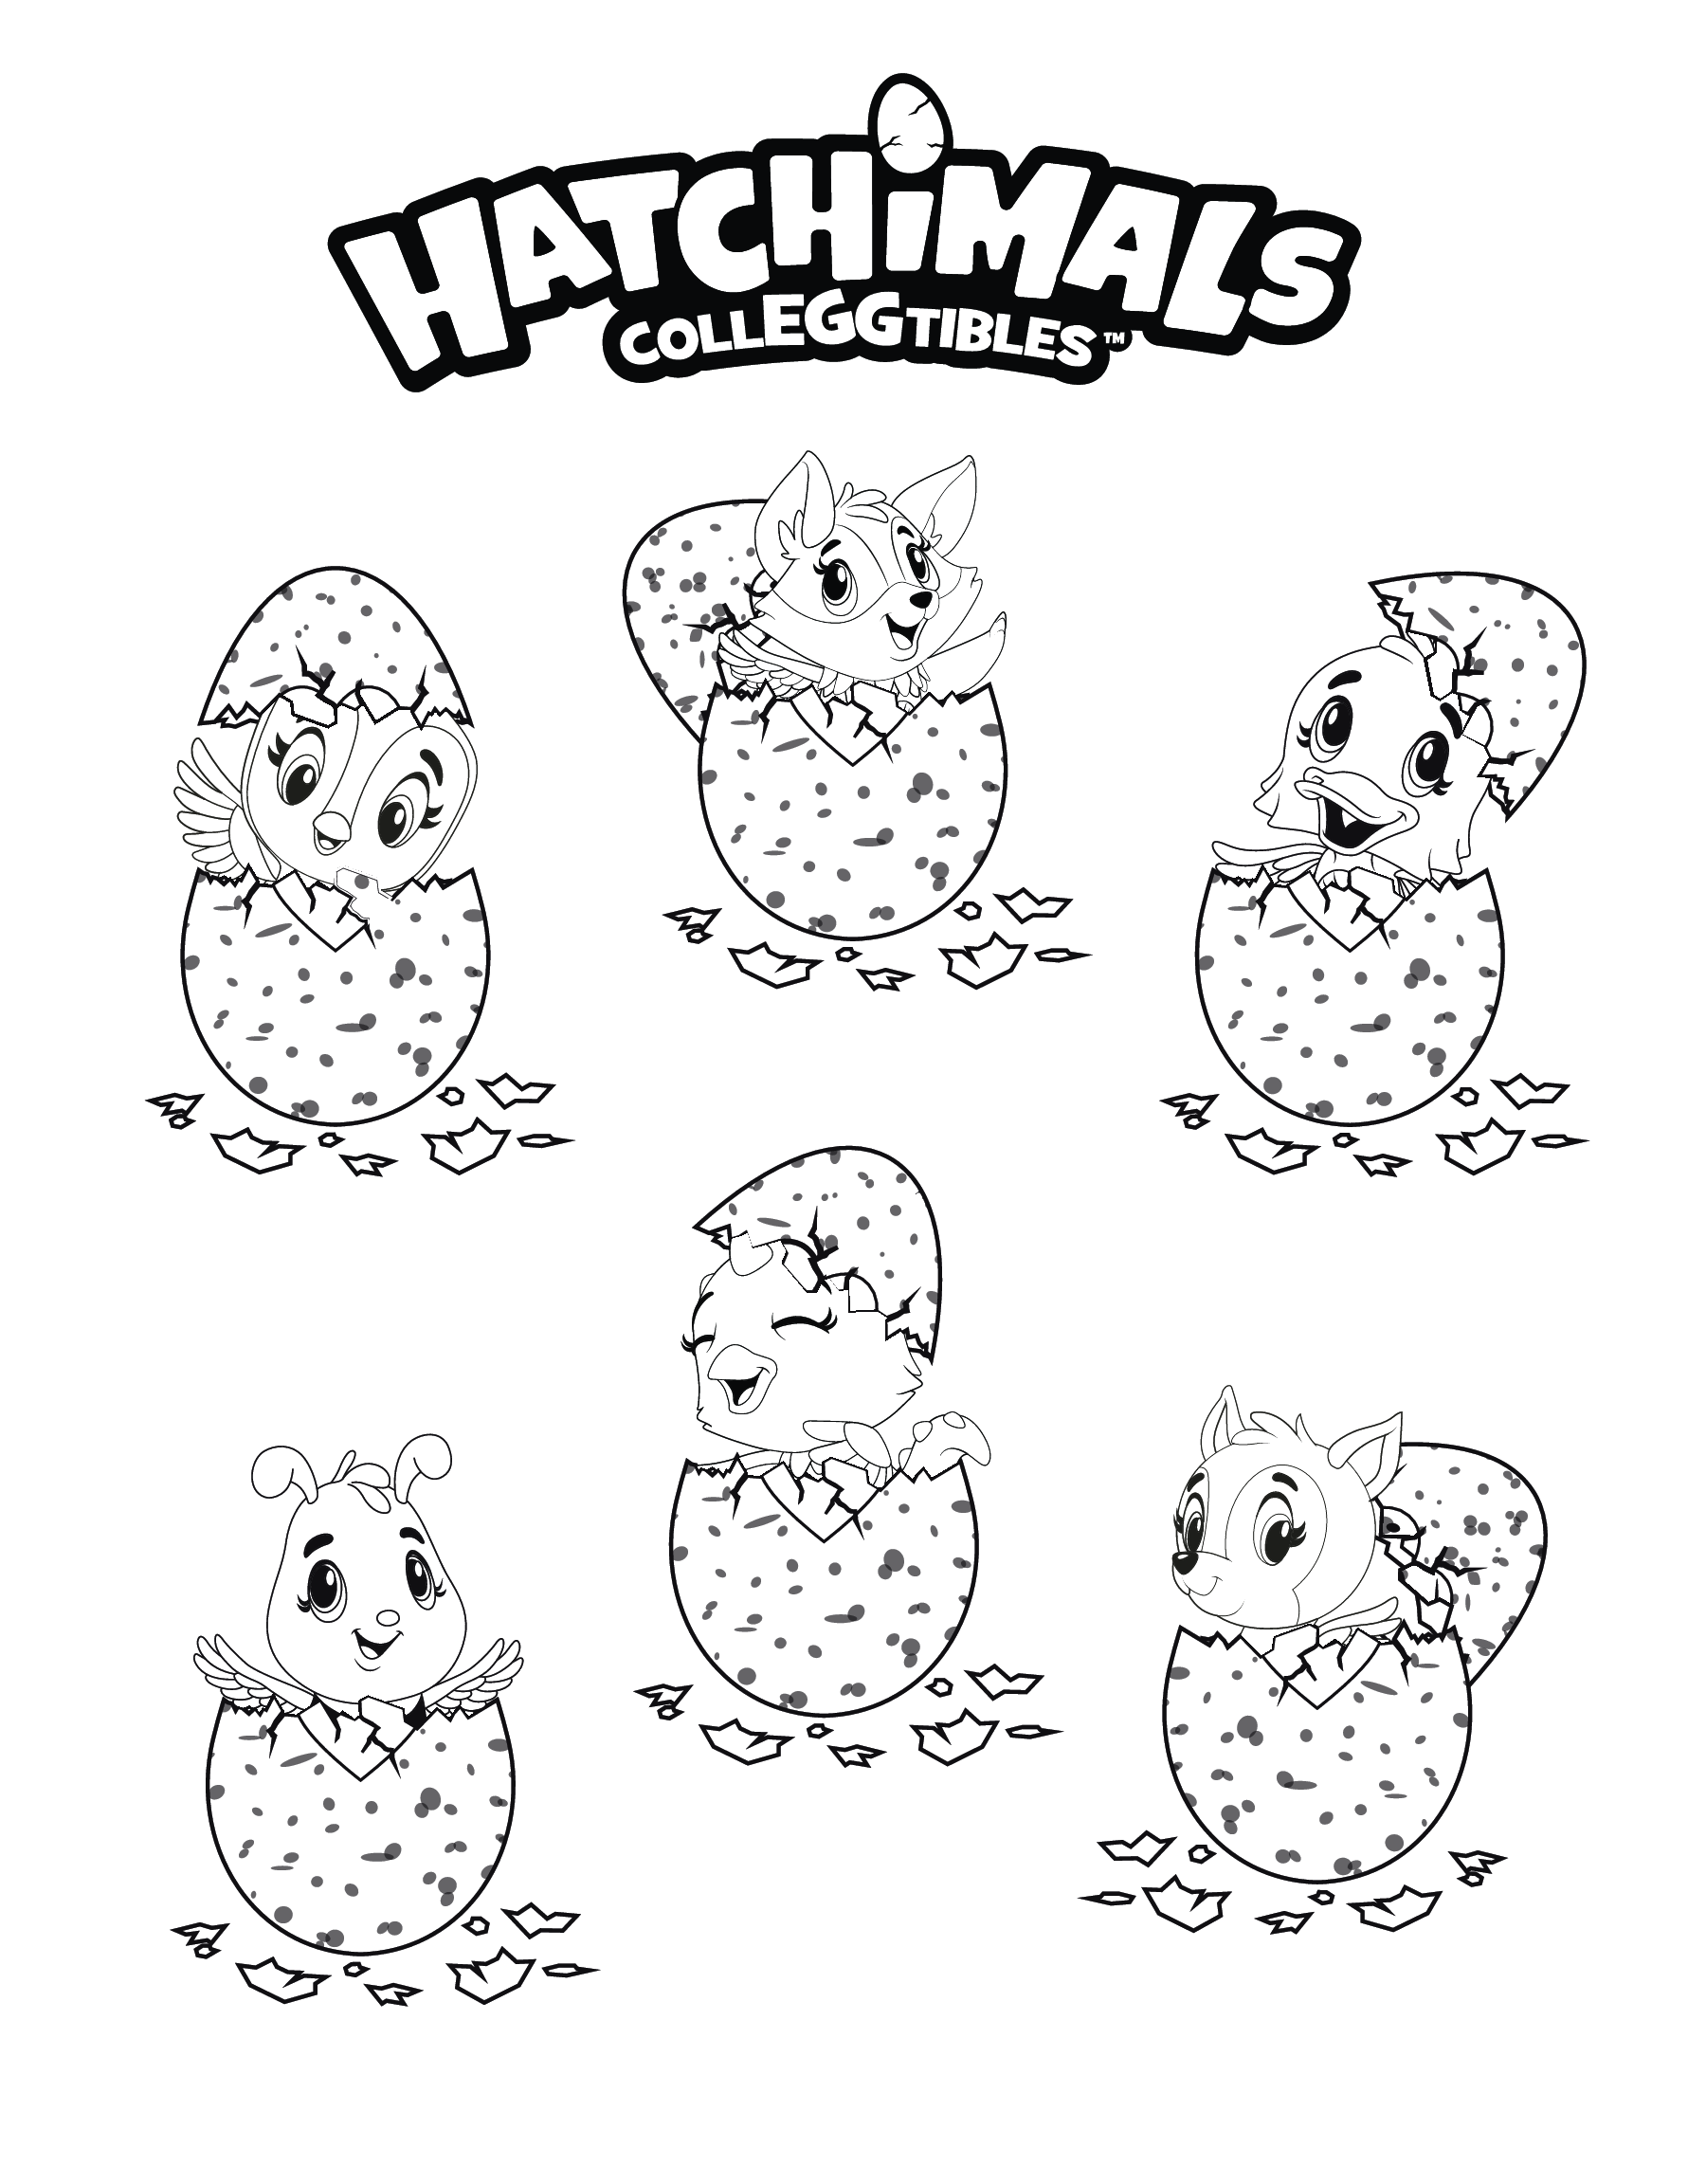 hatchimal colleggtibles coloring pages unicorn